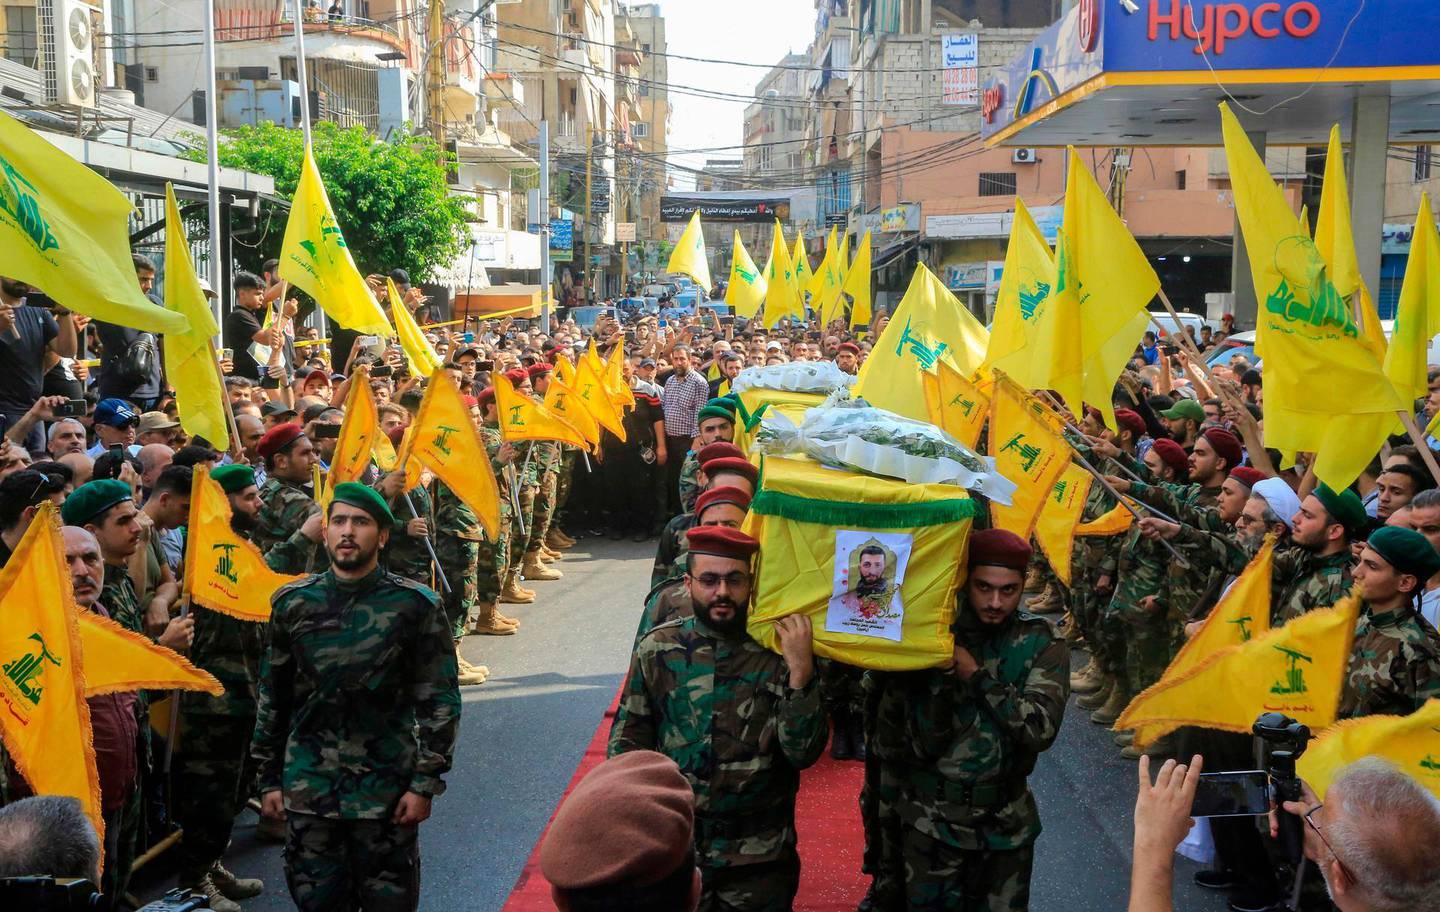 Members of Lebanon's Shiite Hezbollah movement carry the coffin of their fellow comrades, who were killed in Israeli strikes in Syria, during the funeral in the Ghobeiry neighbourhood of southern Beirut on August 26, 2019. The head of Hezbollah Hassan Nasrallah said on August 25 that Israeli strikes overnight in Syria had hit a position used by his Lebanese Shiite group, killing two of its members.
 / AFP / -
